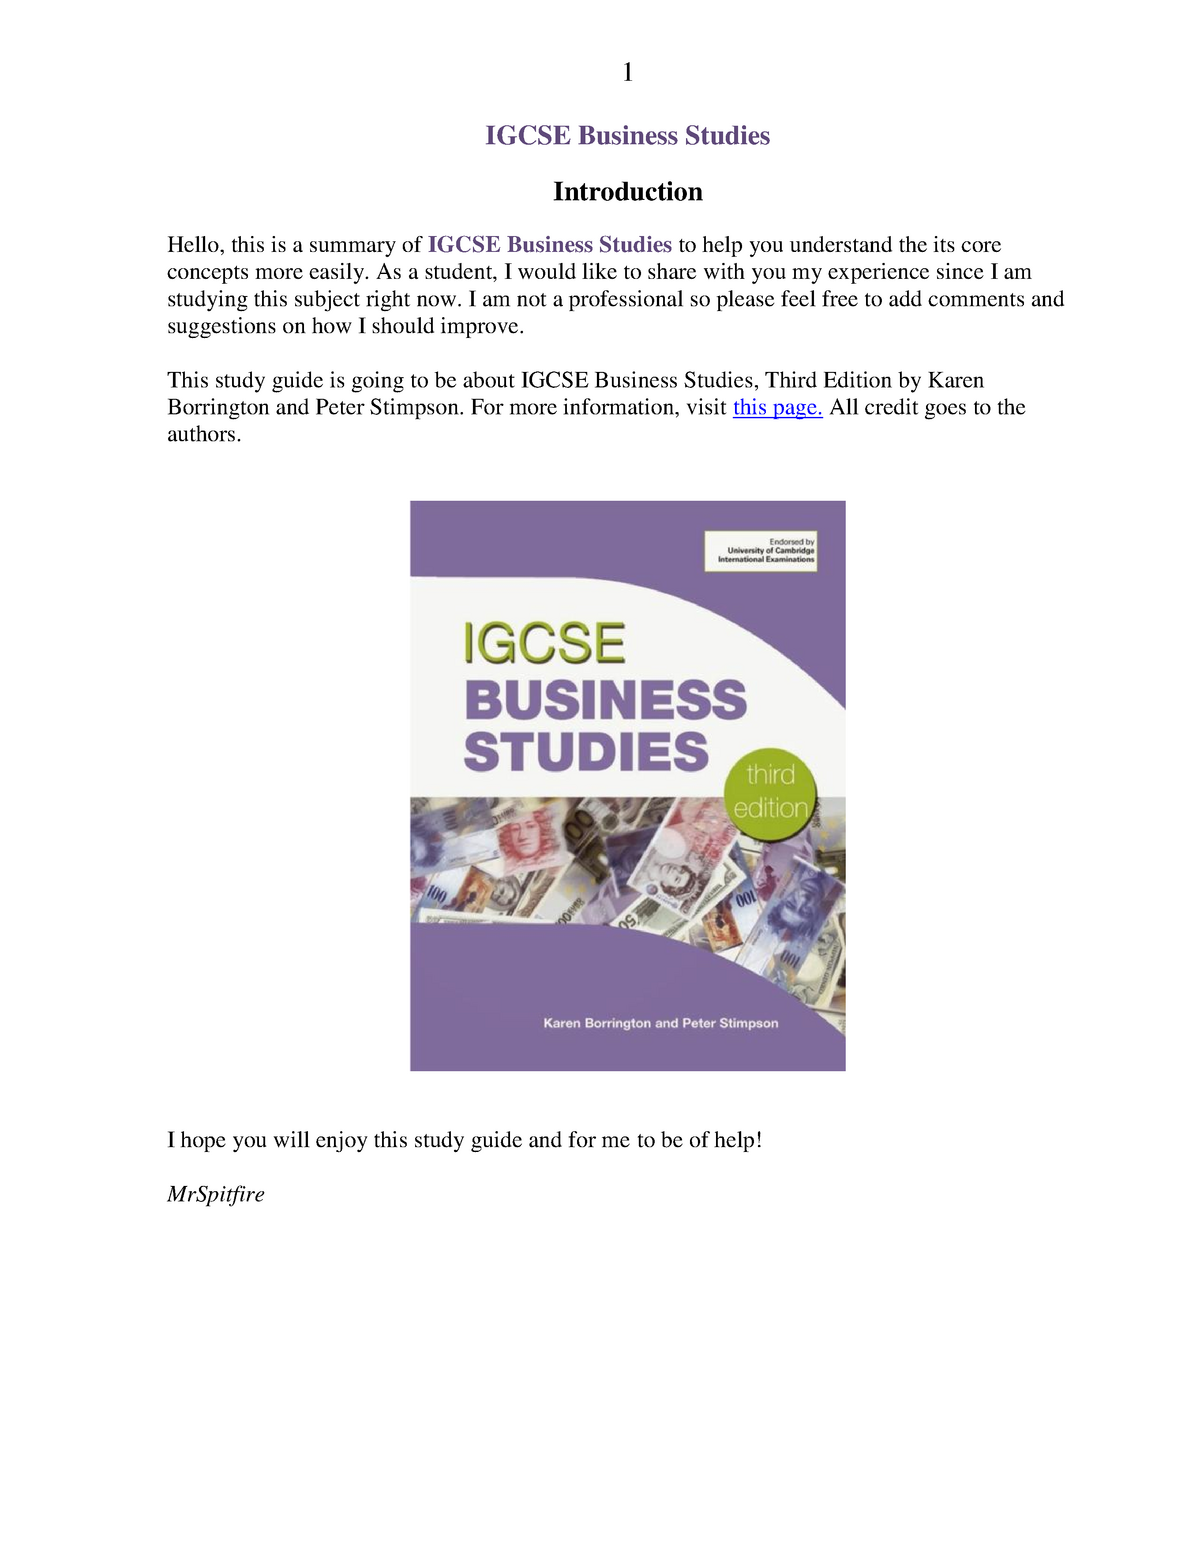 Business Studies Notes for Igcse - IGCSE Business Studies Introduction Hello, this is a summary of - Studocu